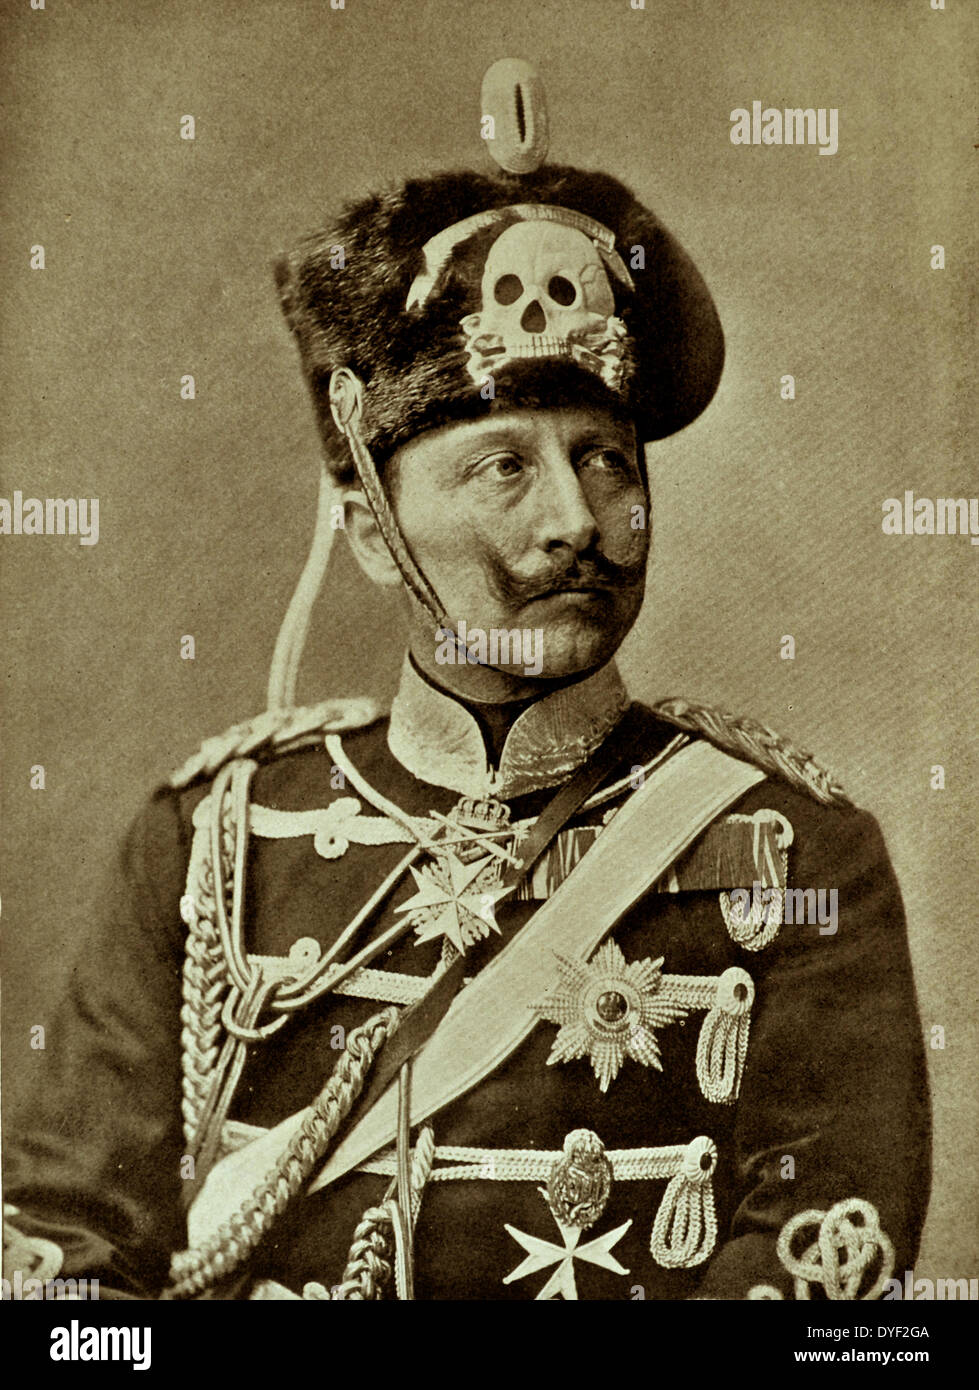 Wilhelm II or William II (Friedrich Wilhelm von Preußen); 27 January 1859 – 4 June 1941) was the last German Emperor (Kaiser) and King of Prussia, ruling the German Empire and the Kingdom of Prussia from 15 June 1888 to 9 November 1918. Stock Photo